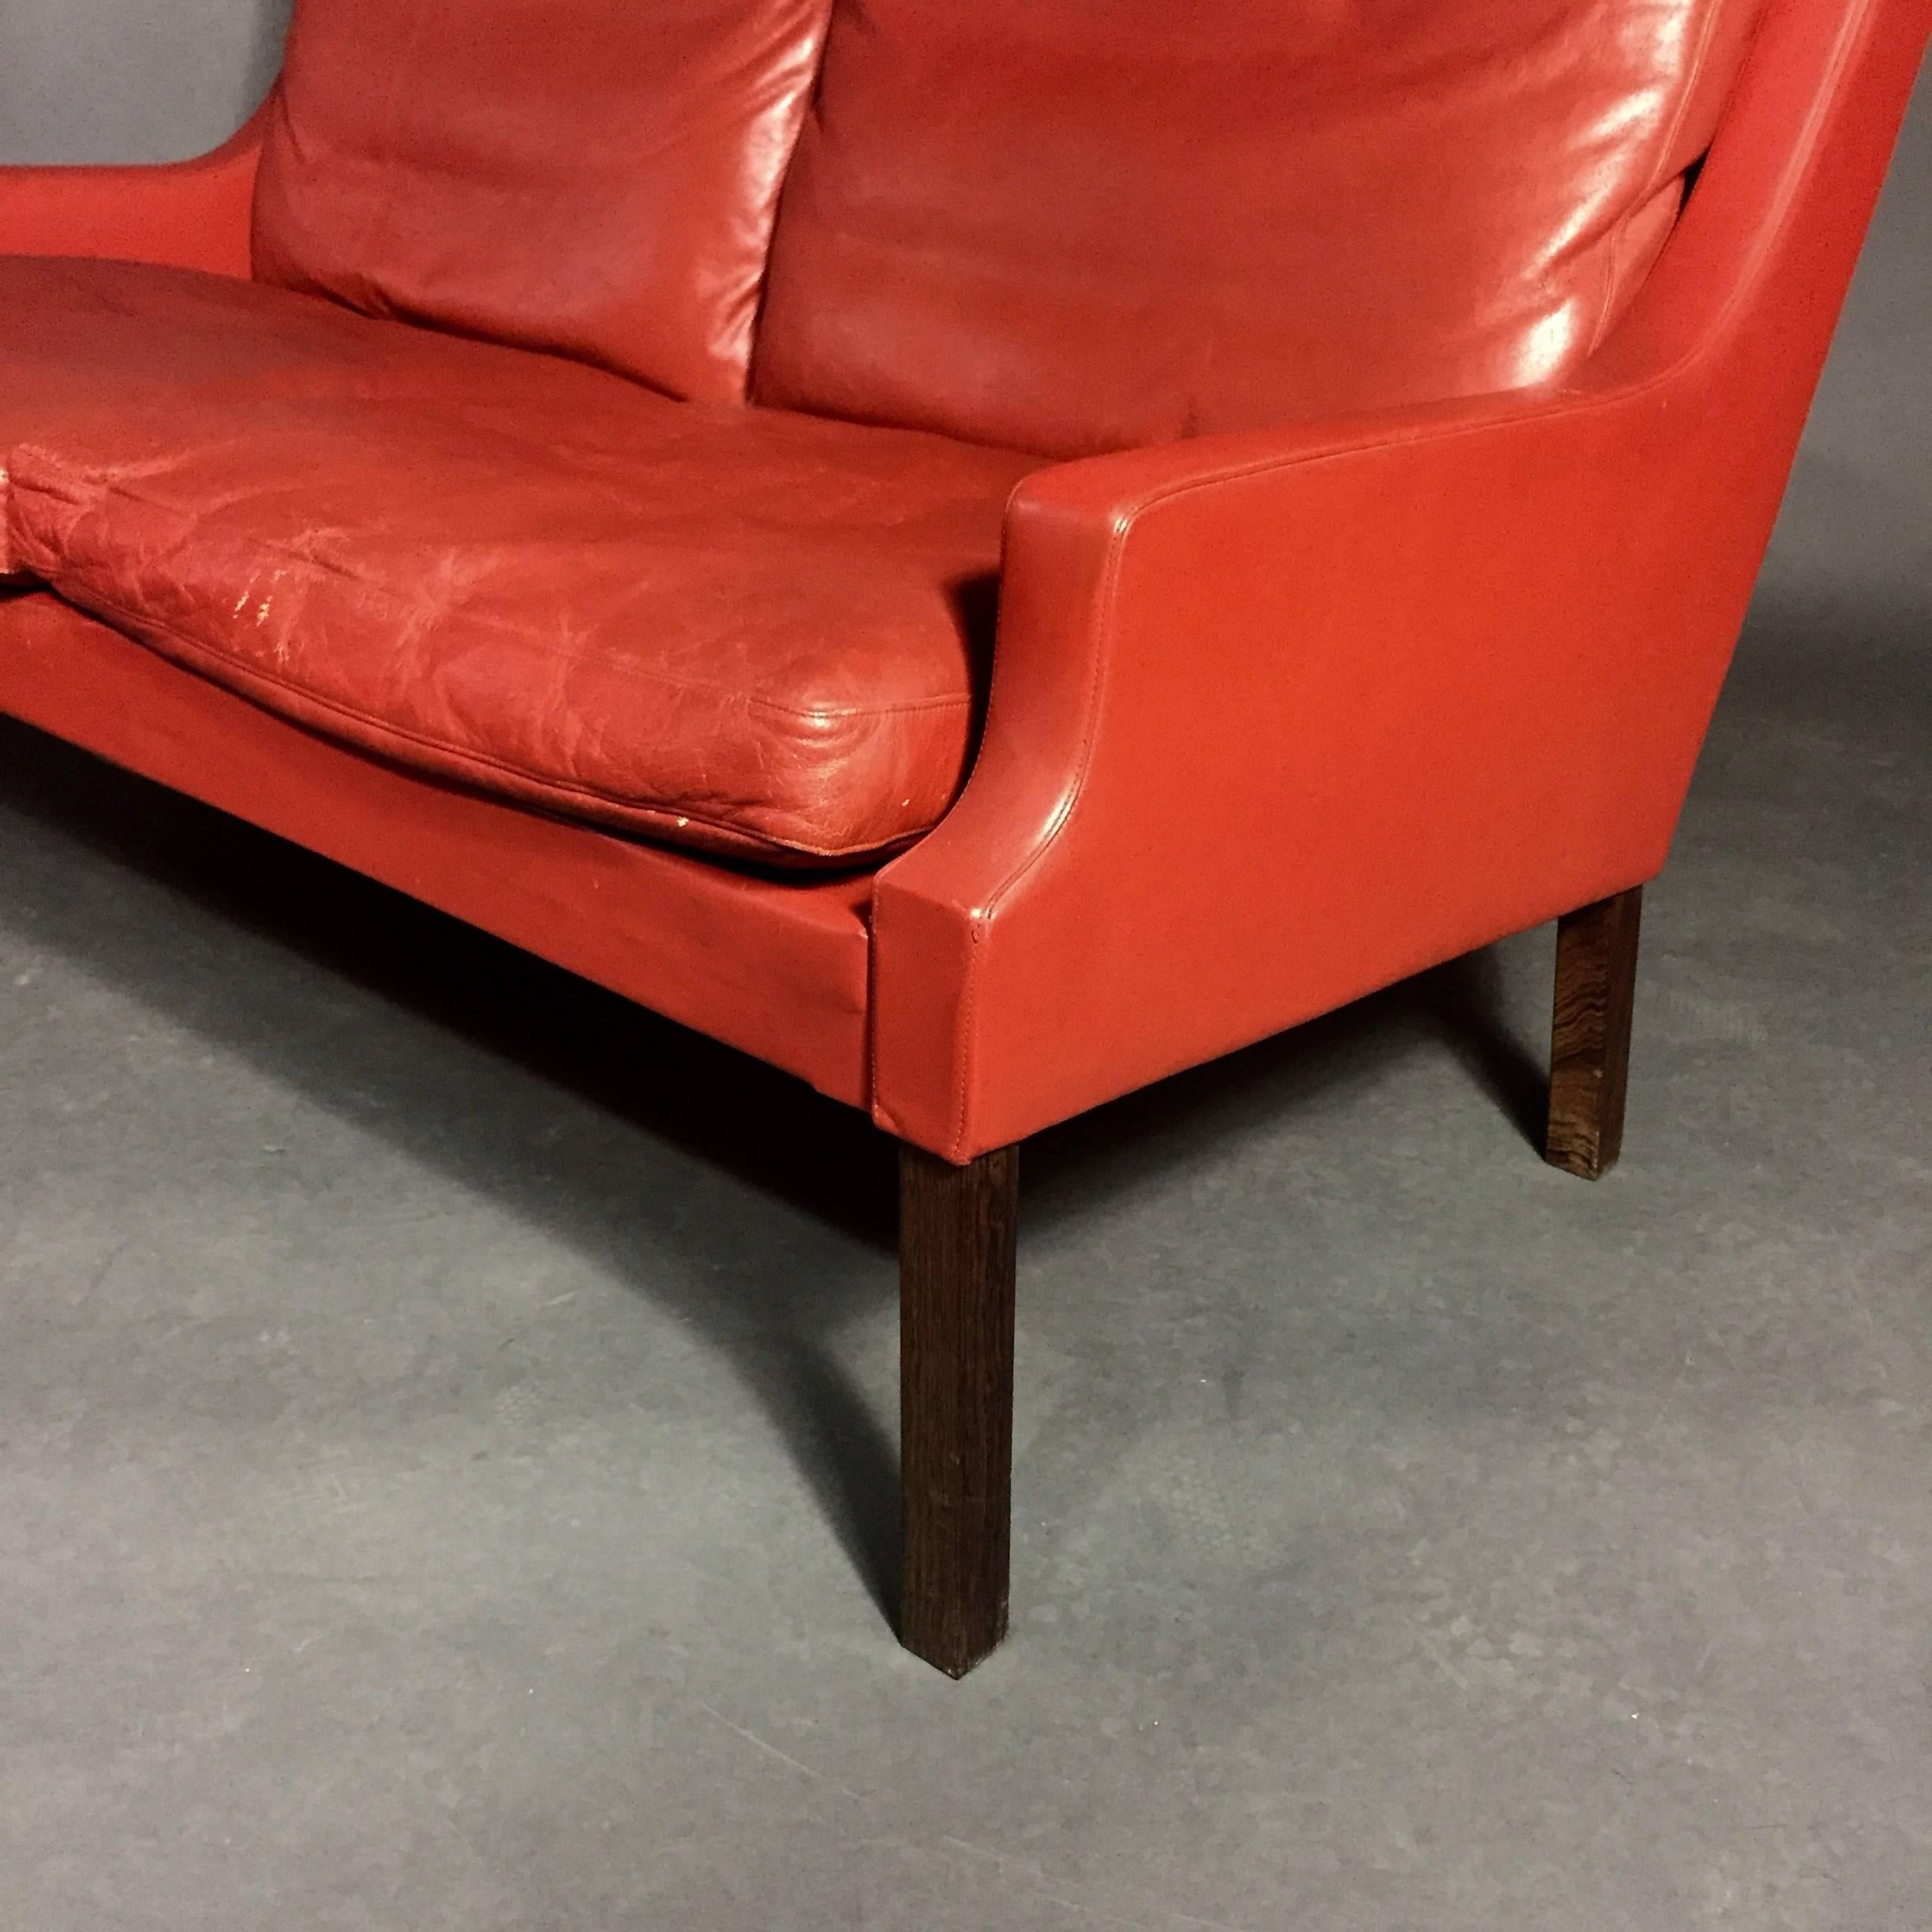 Mid-20th Century George Thams Red Leather and Rosewood Sofa, Denmark, 1960s